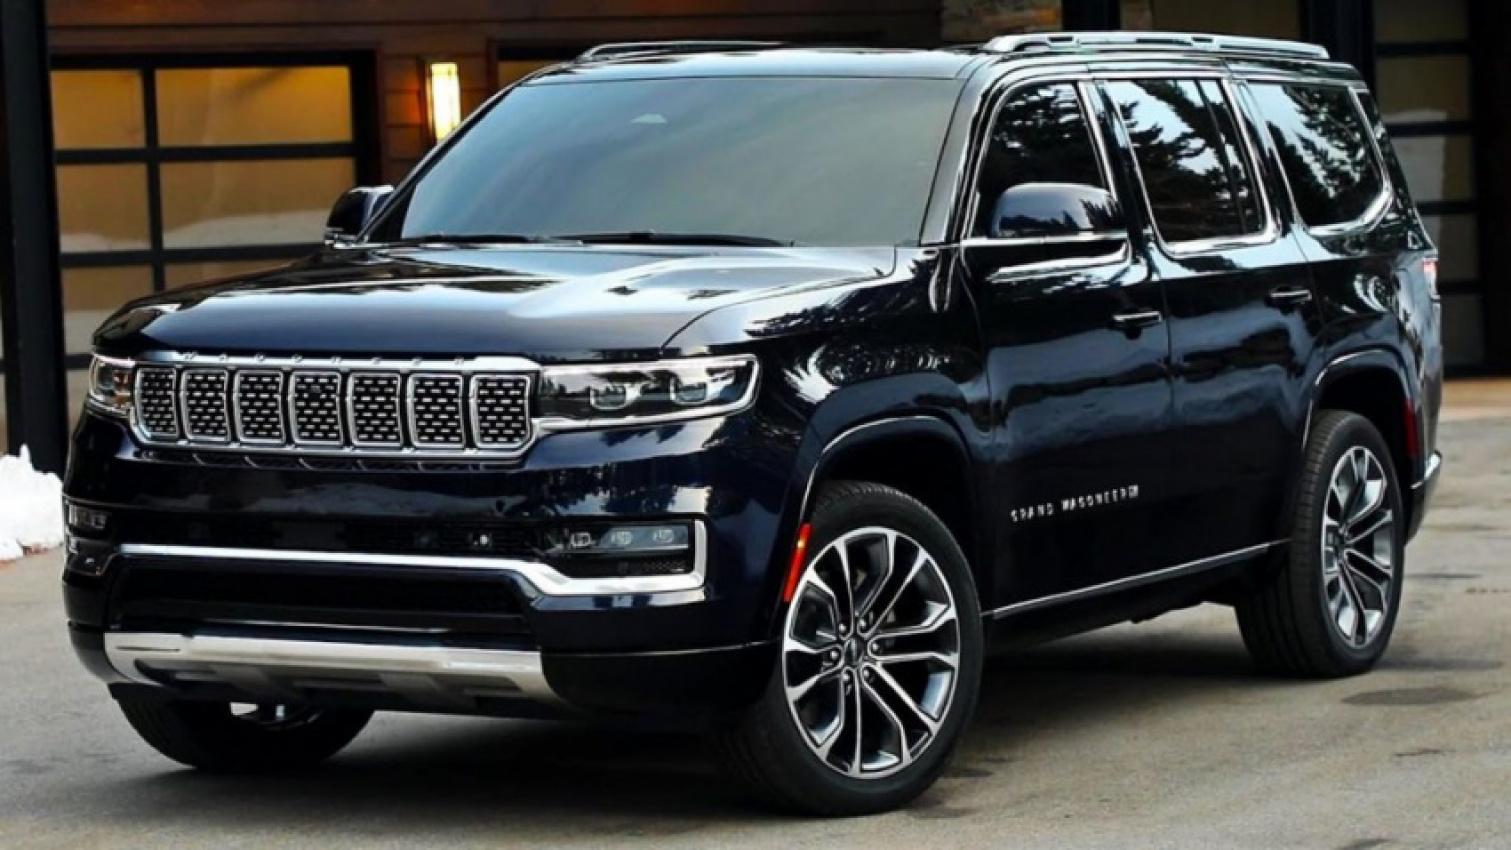 autos, cars, jeep, full-size suv, grand wagoneer, luxury suv, autoguide.com says the most luxurious suv is a jeep